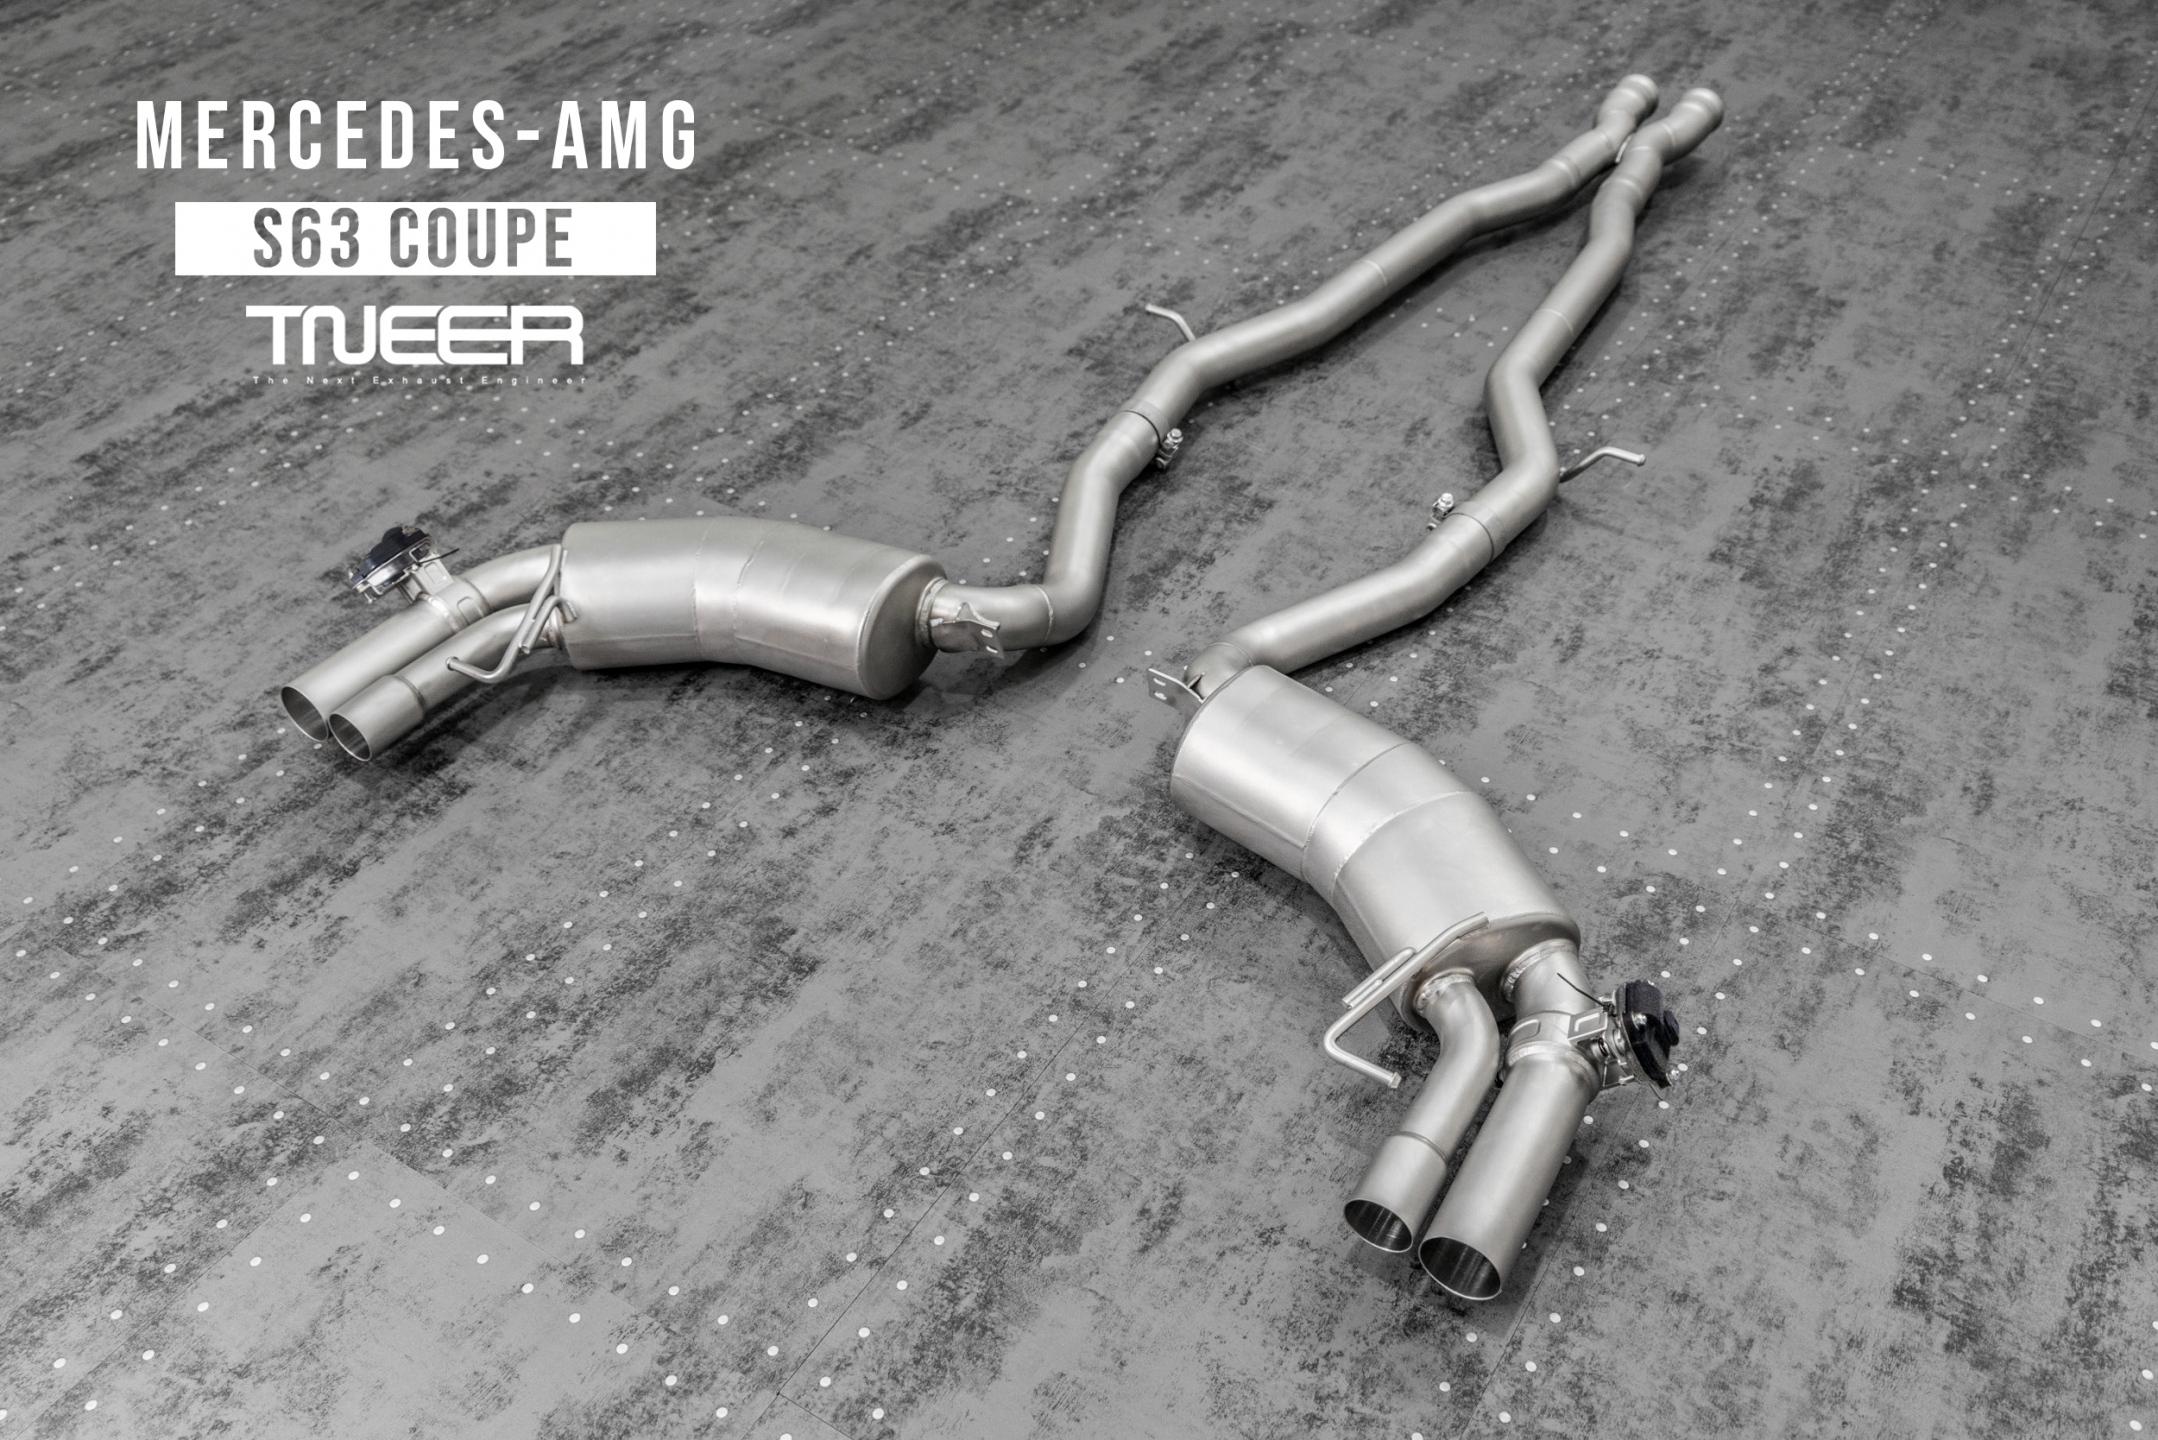 Audi TT (Mk2) Large Bore Downpipe With Hi-Flow Sports Catalyst